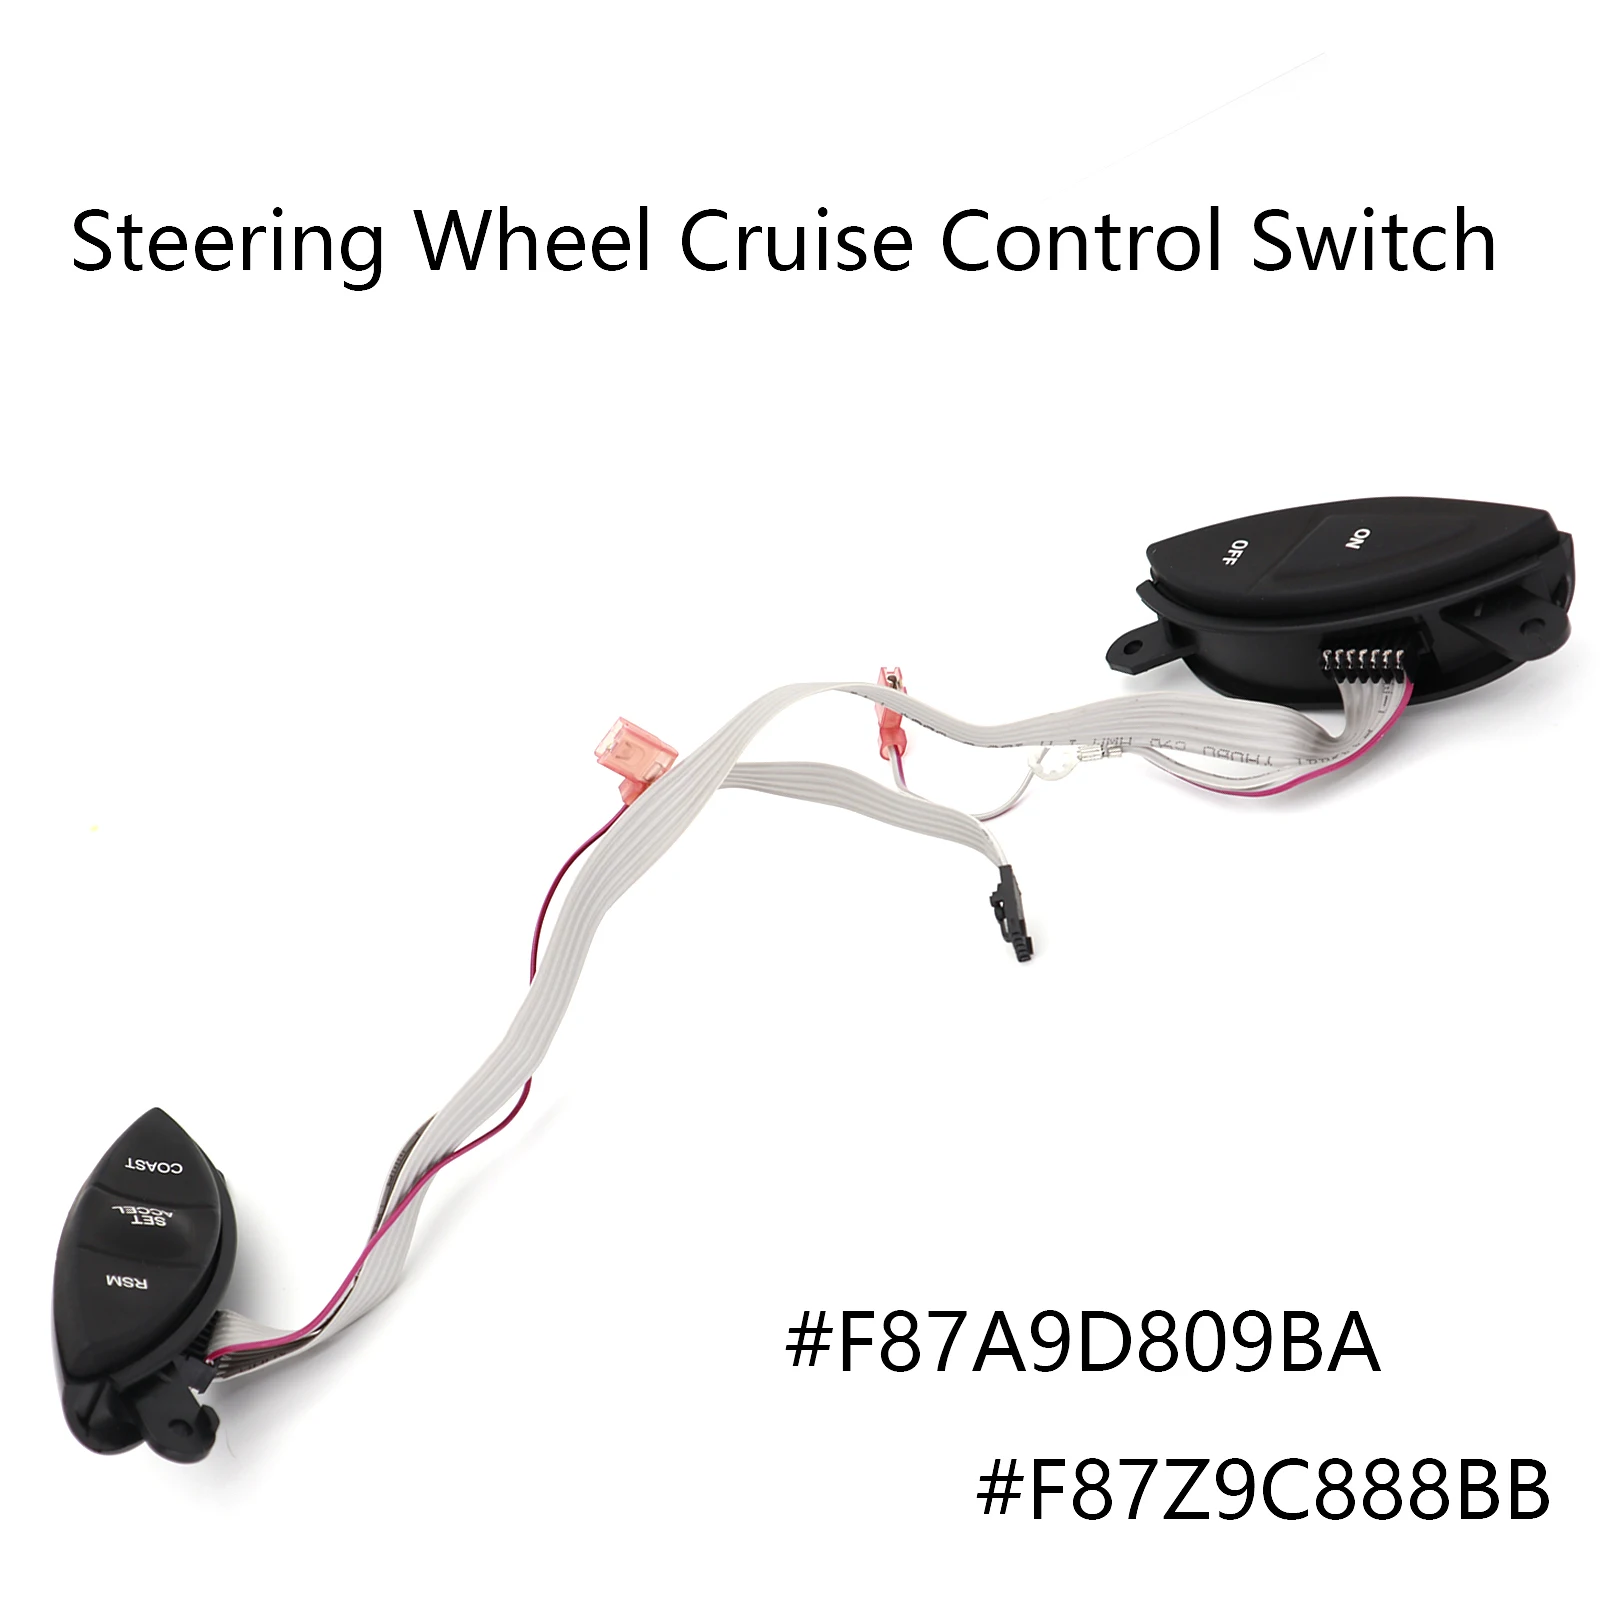 1X Car Steering Wheel Cruise Control Switch Button For Ford F150 Sport Trac 98-05 Mercury Mountaineer Replaces Tools F87A9D809BA